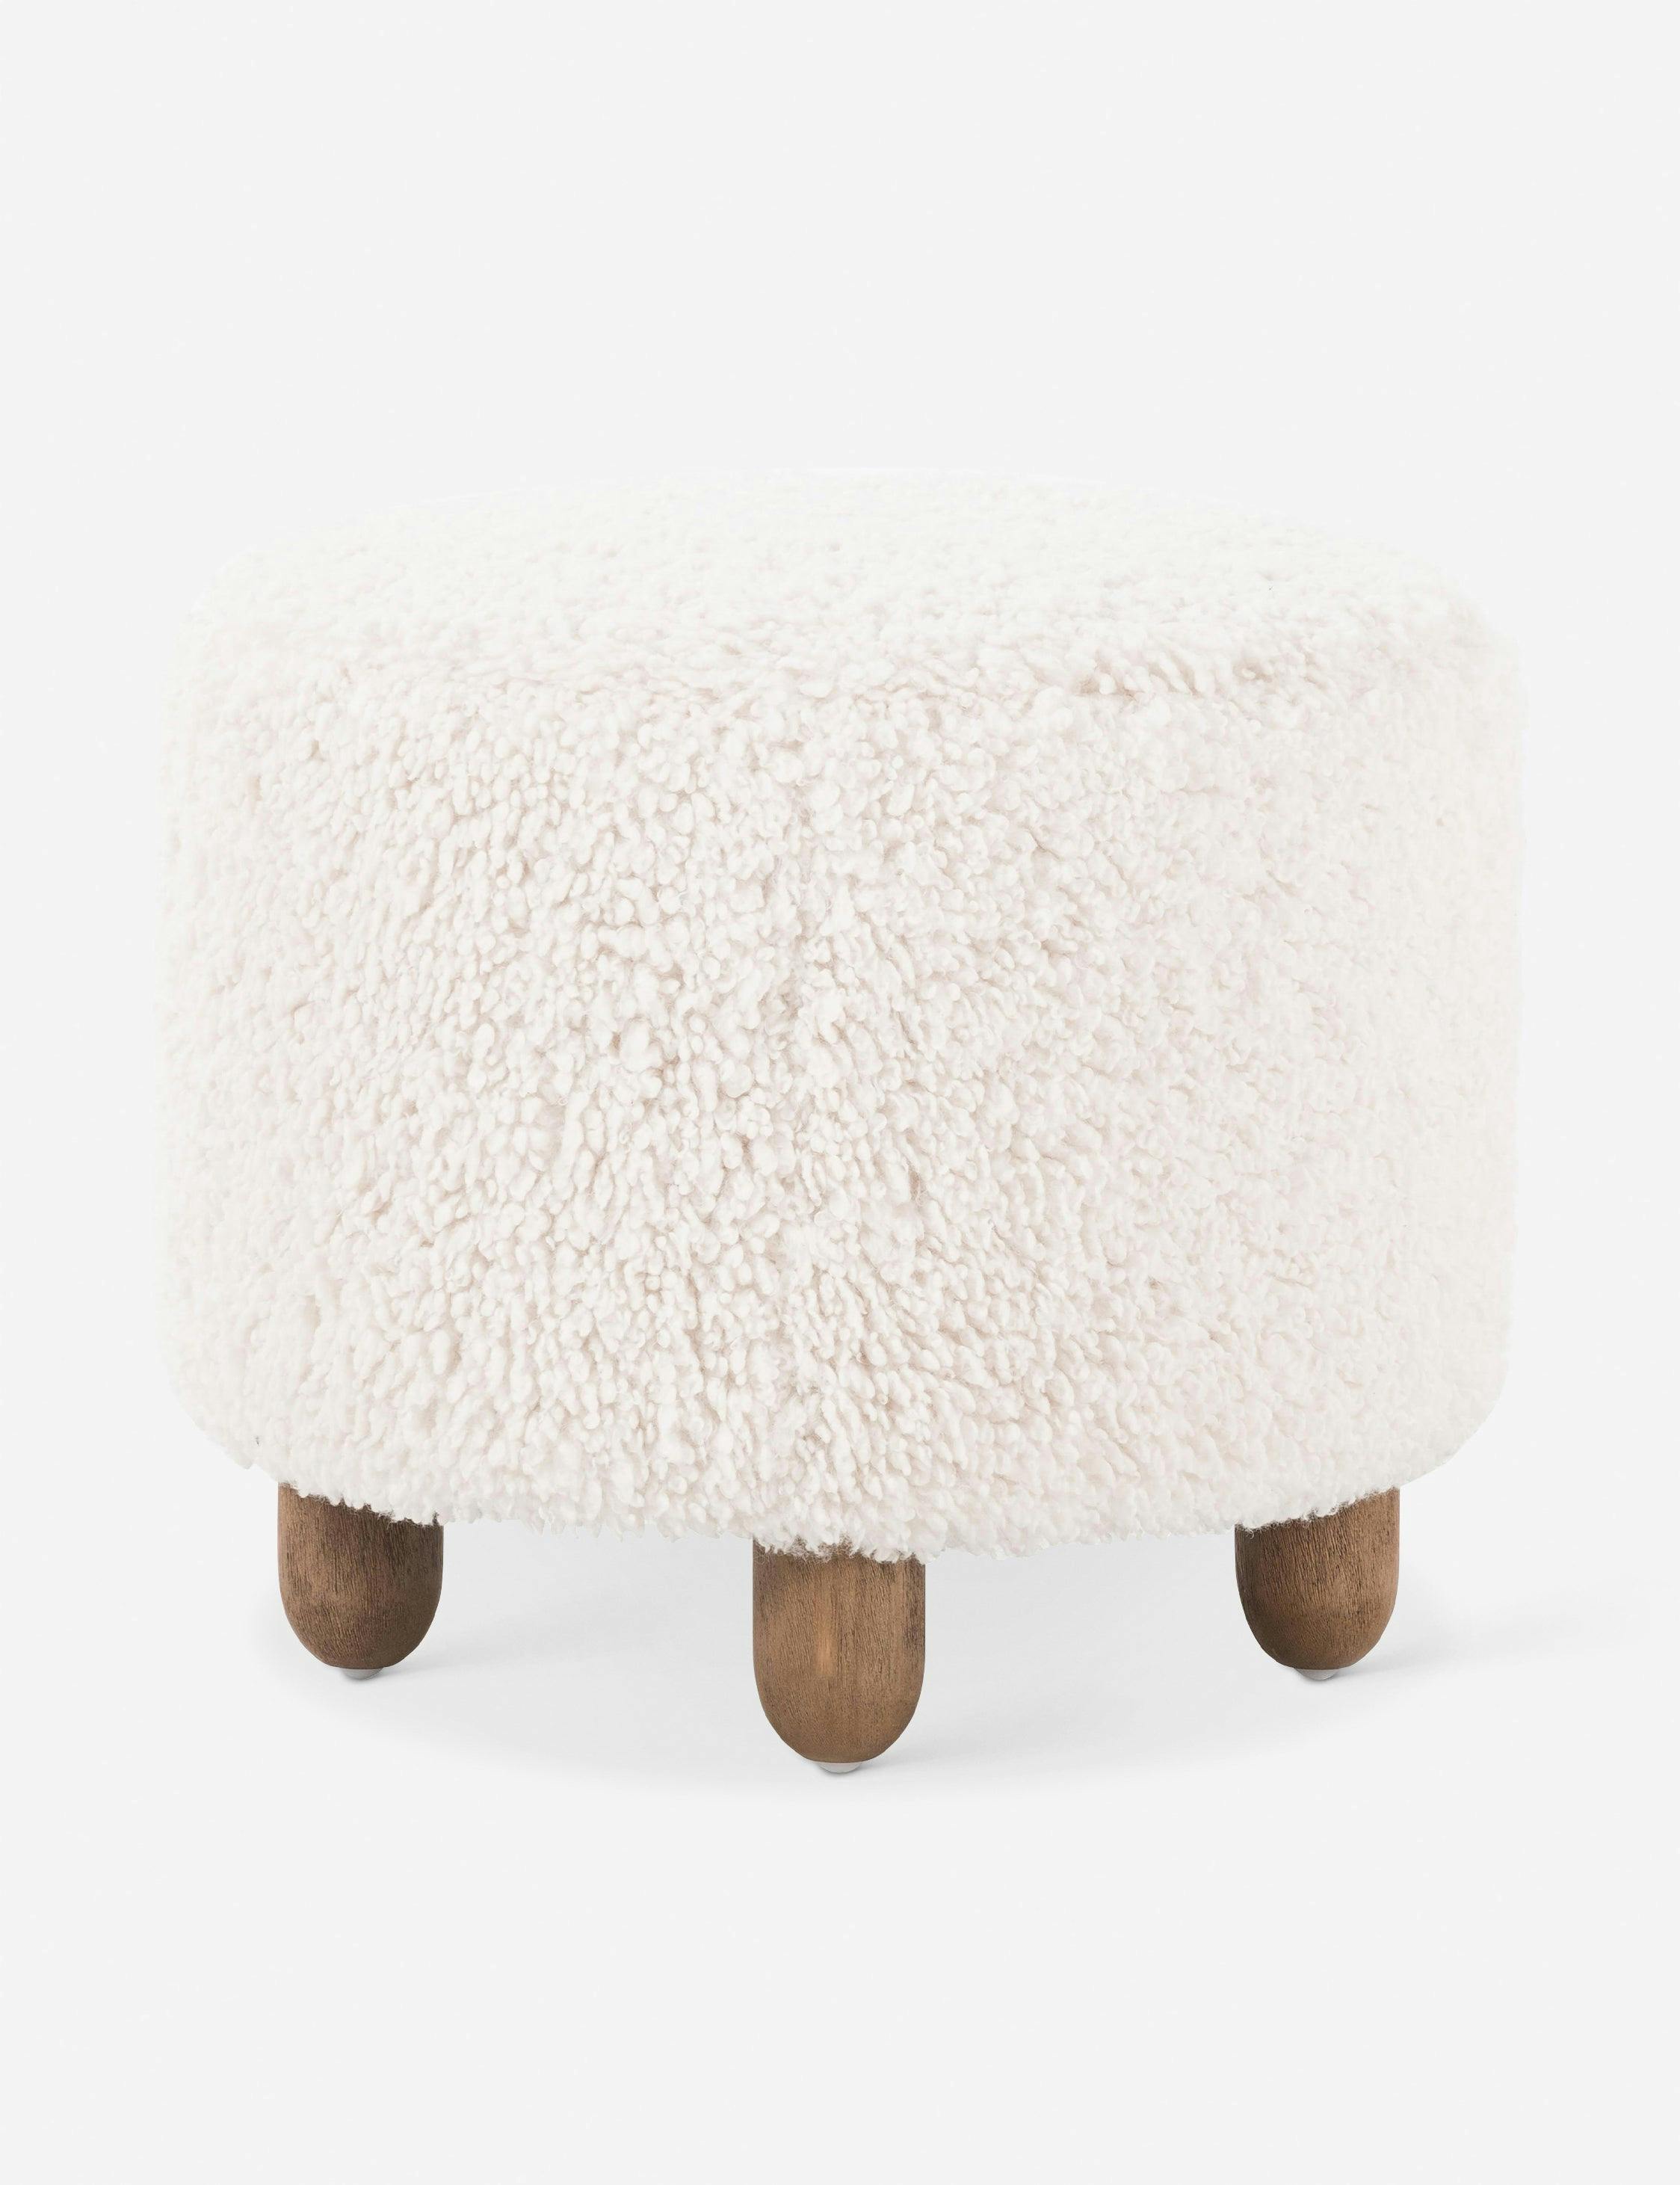 Aniston 22.5'' Ivory Sheepskin Round Ottoman with Wire-Brushed Legs